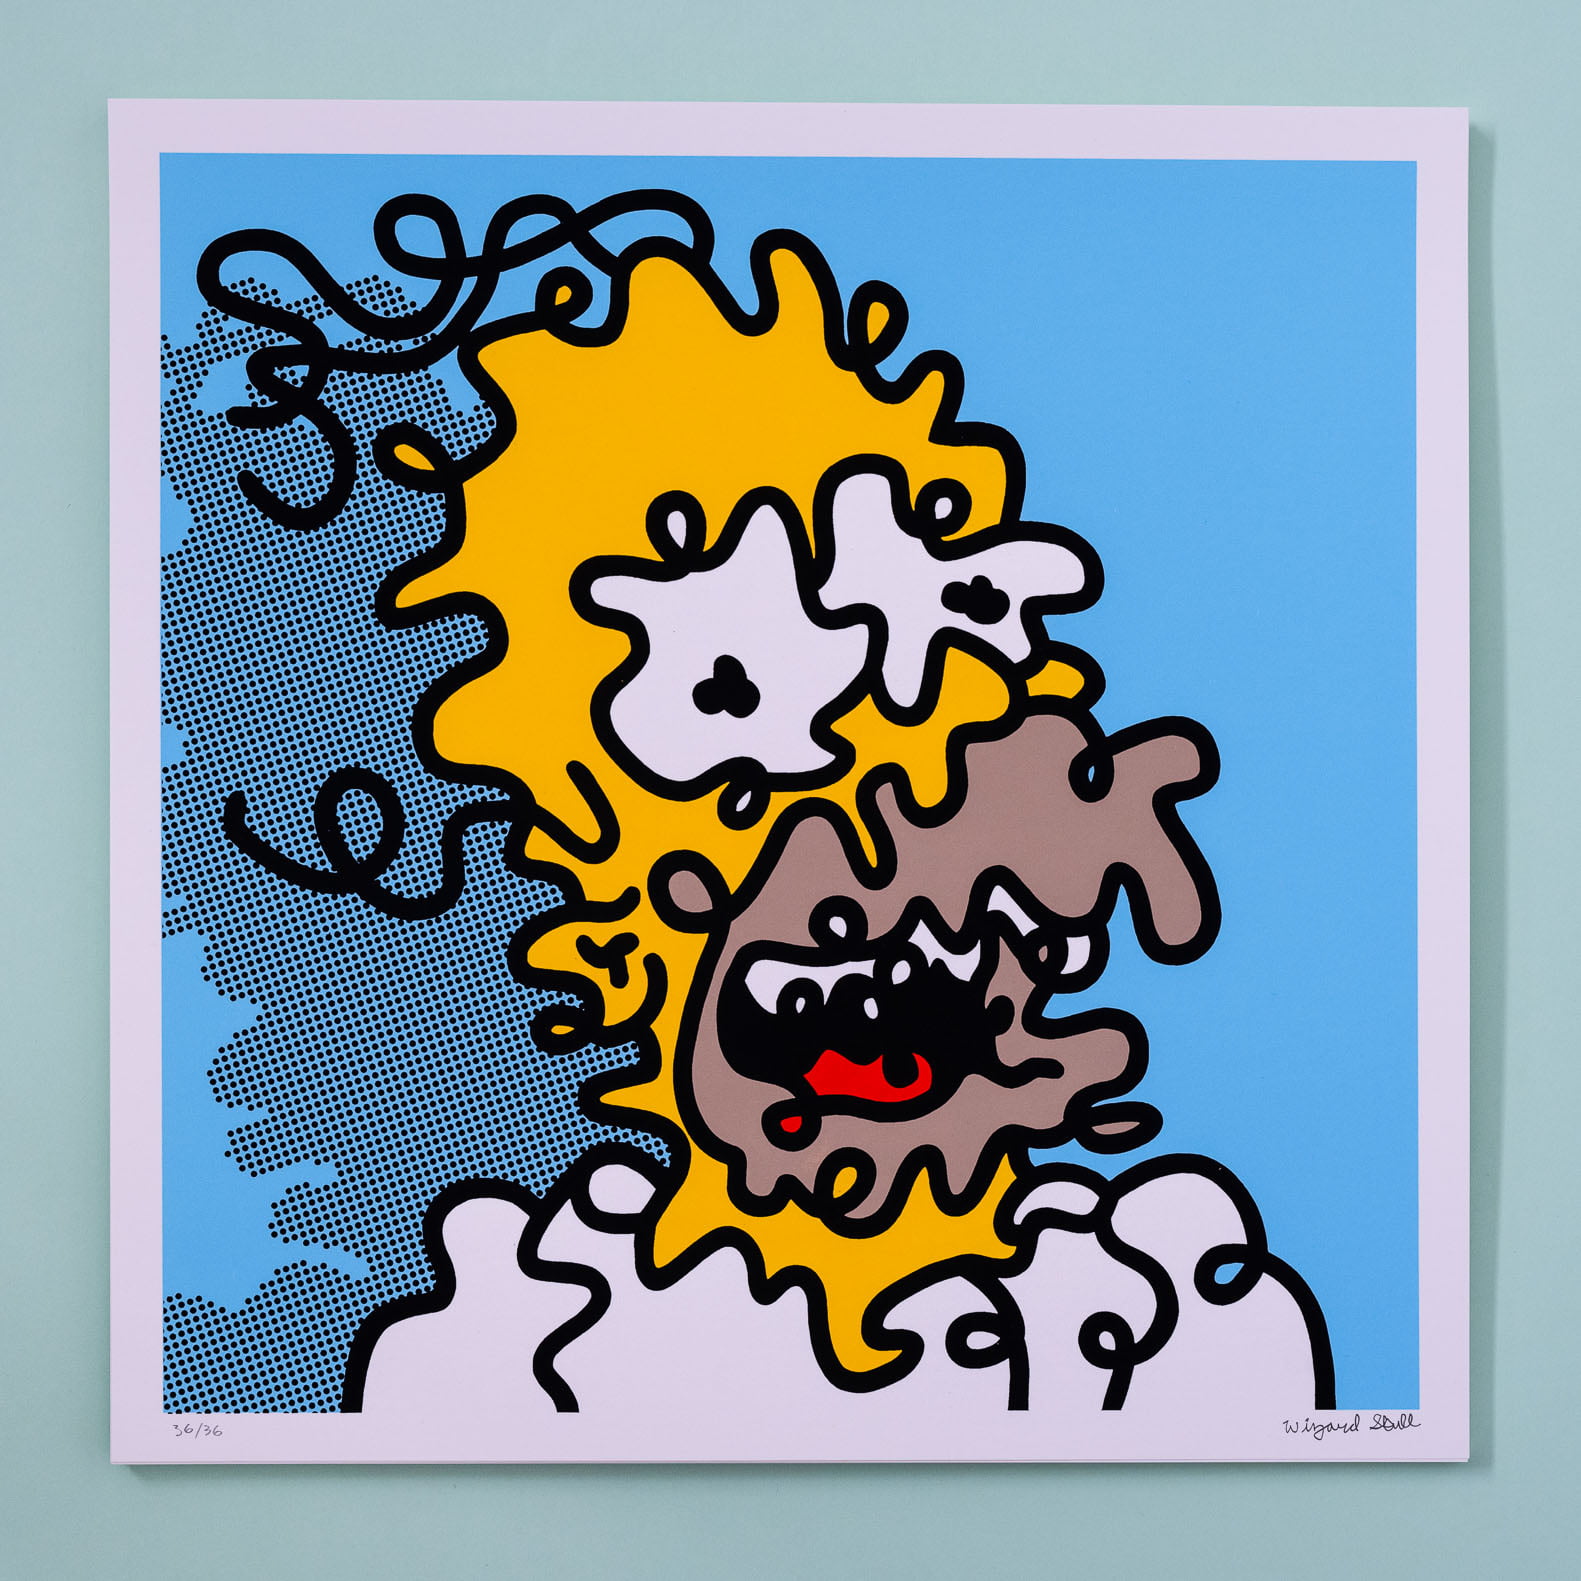 Homer - The Simpsons with wobbly lines as screen print edition